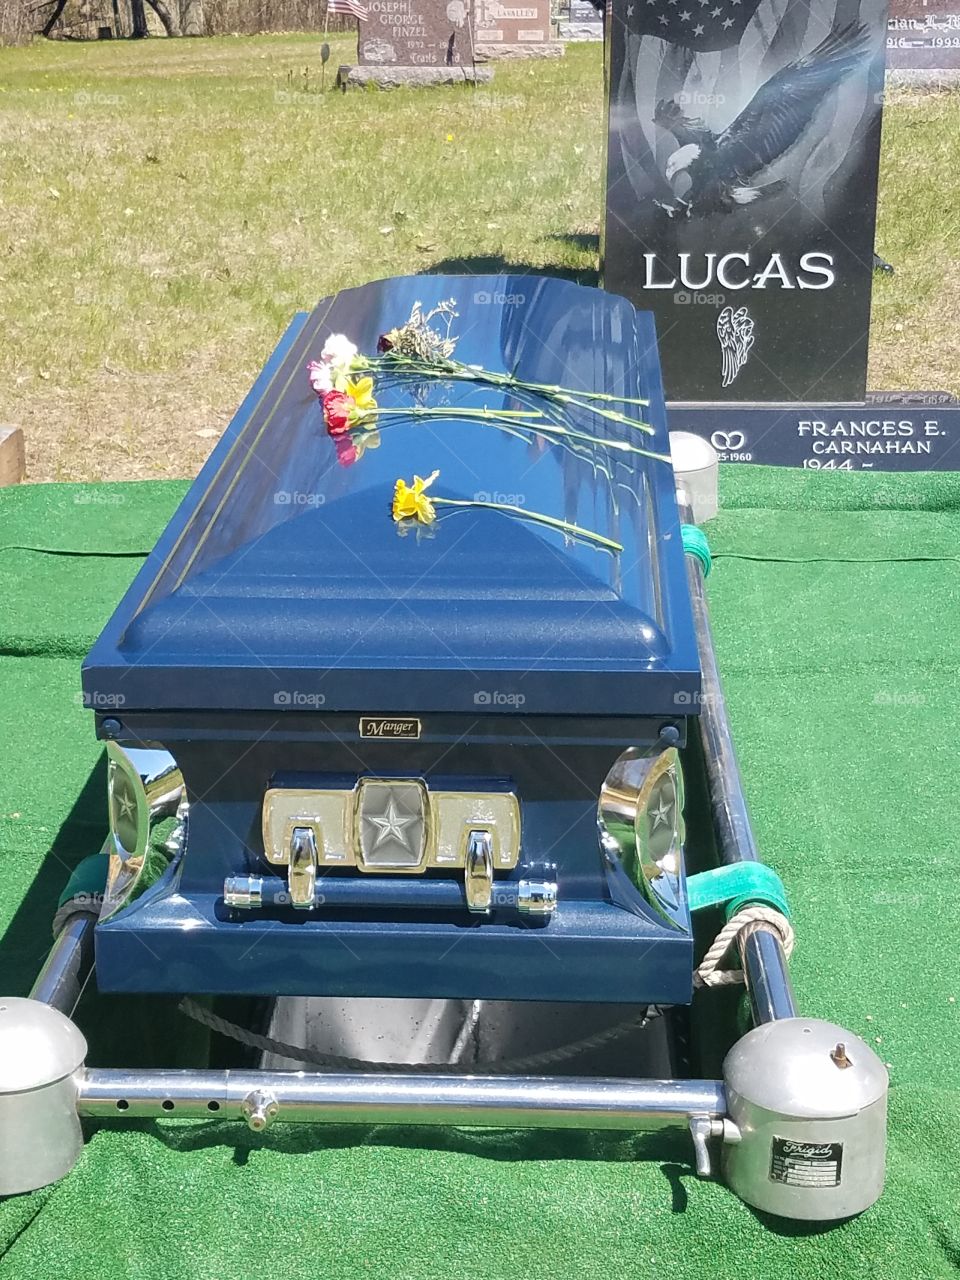 An American Hero Laid to Rest